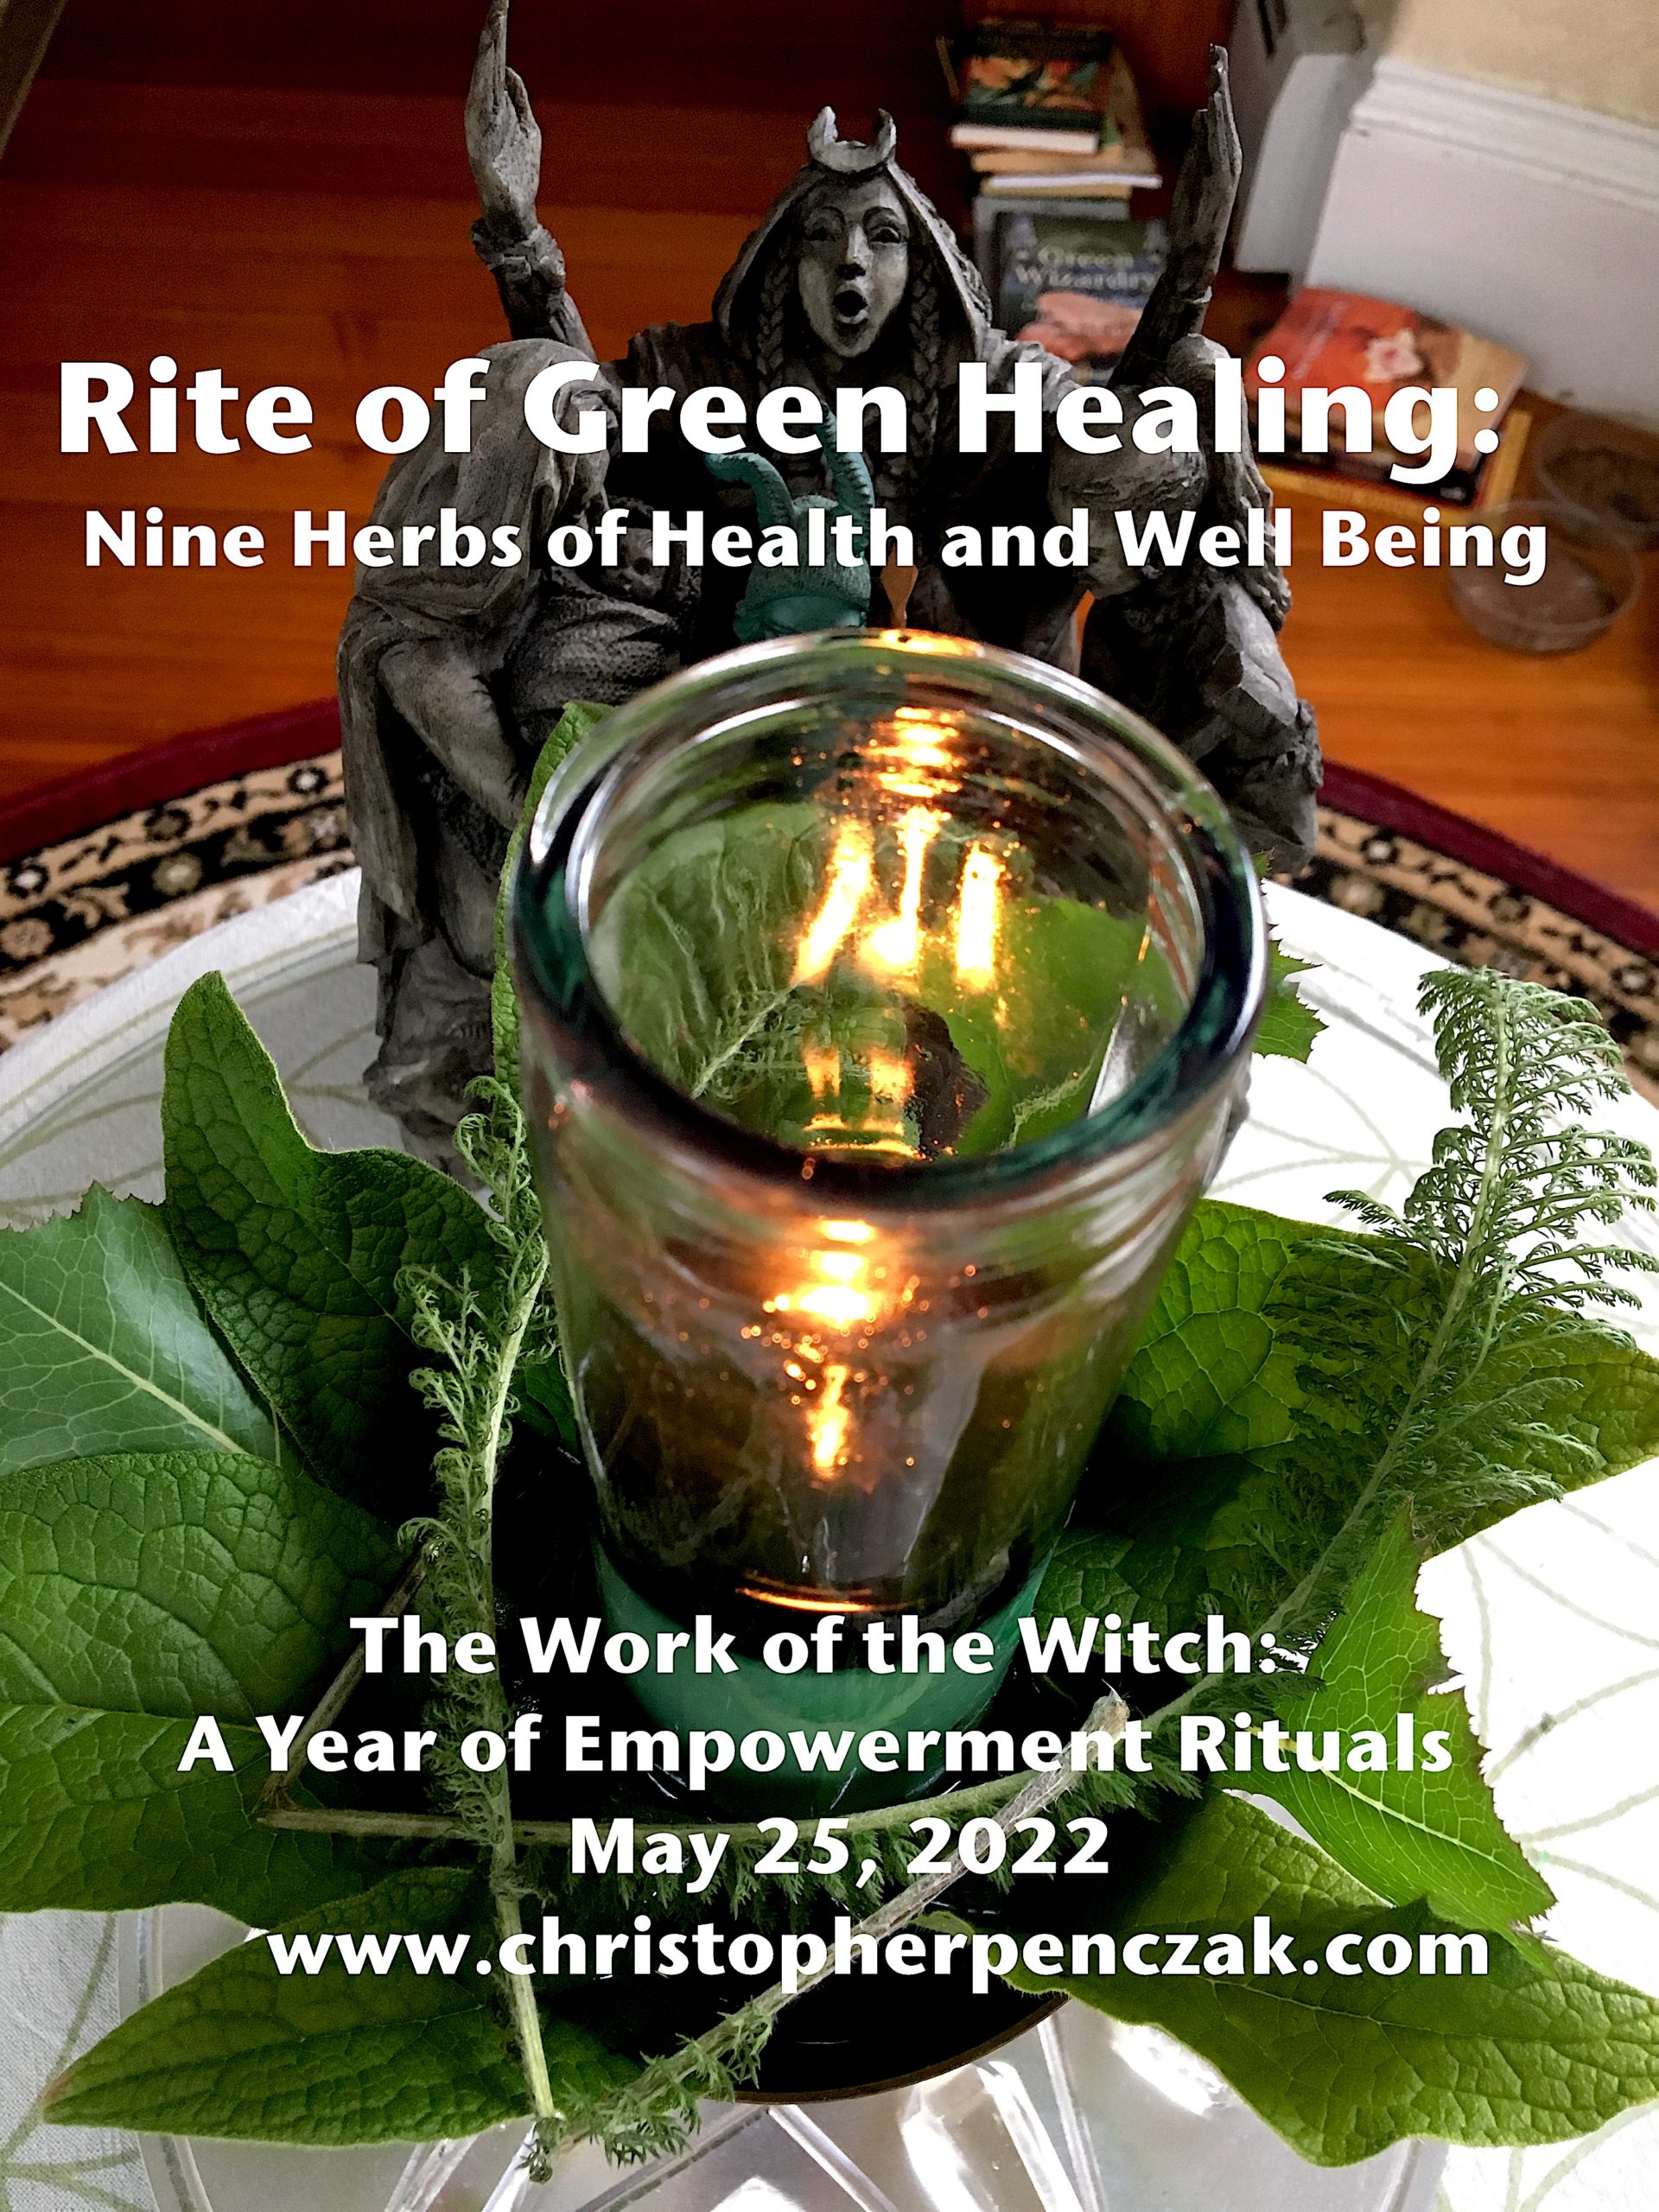 Rite of Green Healing: Herbs of Health and Well Being